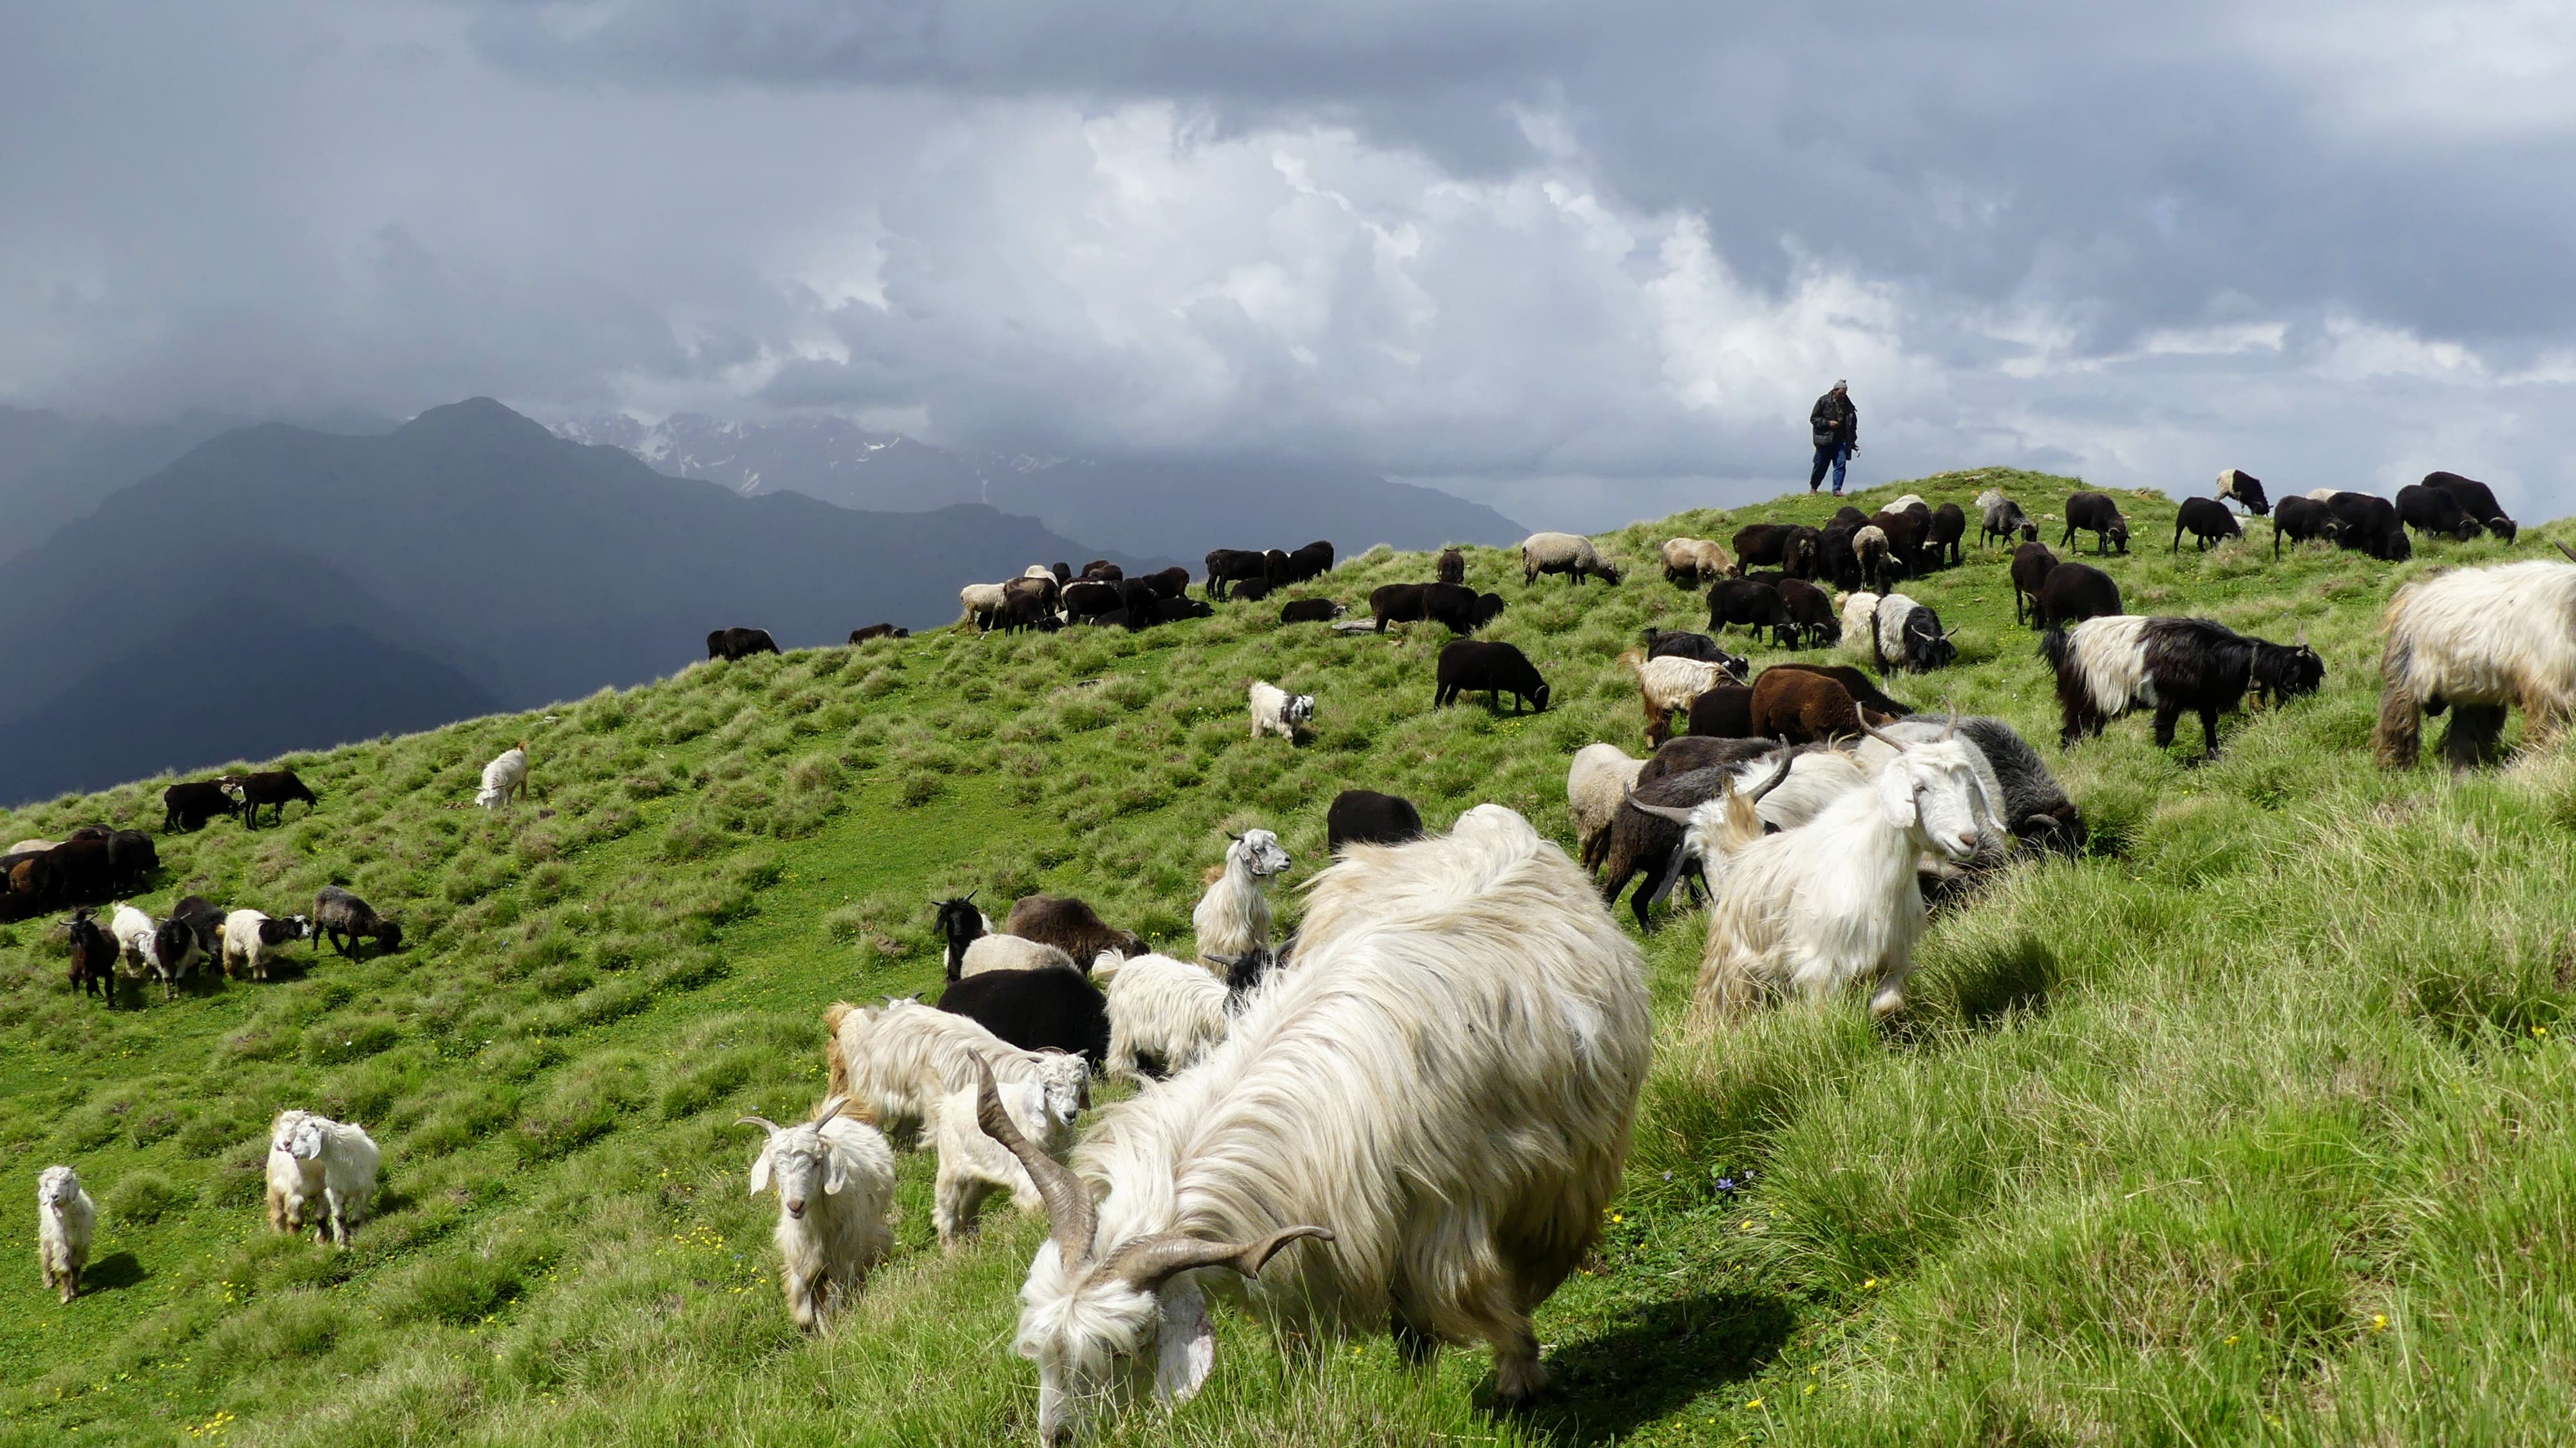 Herding in the alpine meadows of Rudranath by Palsi, IC Shepherds of Himalayas